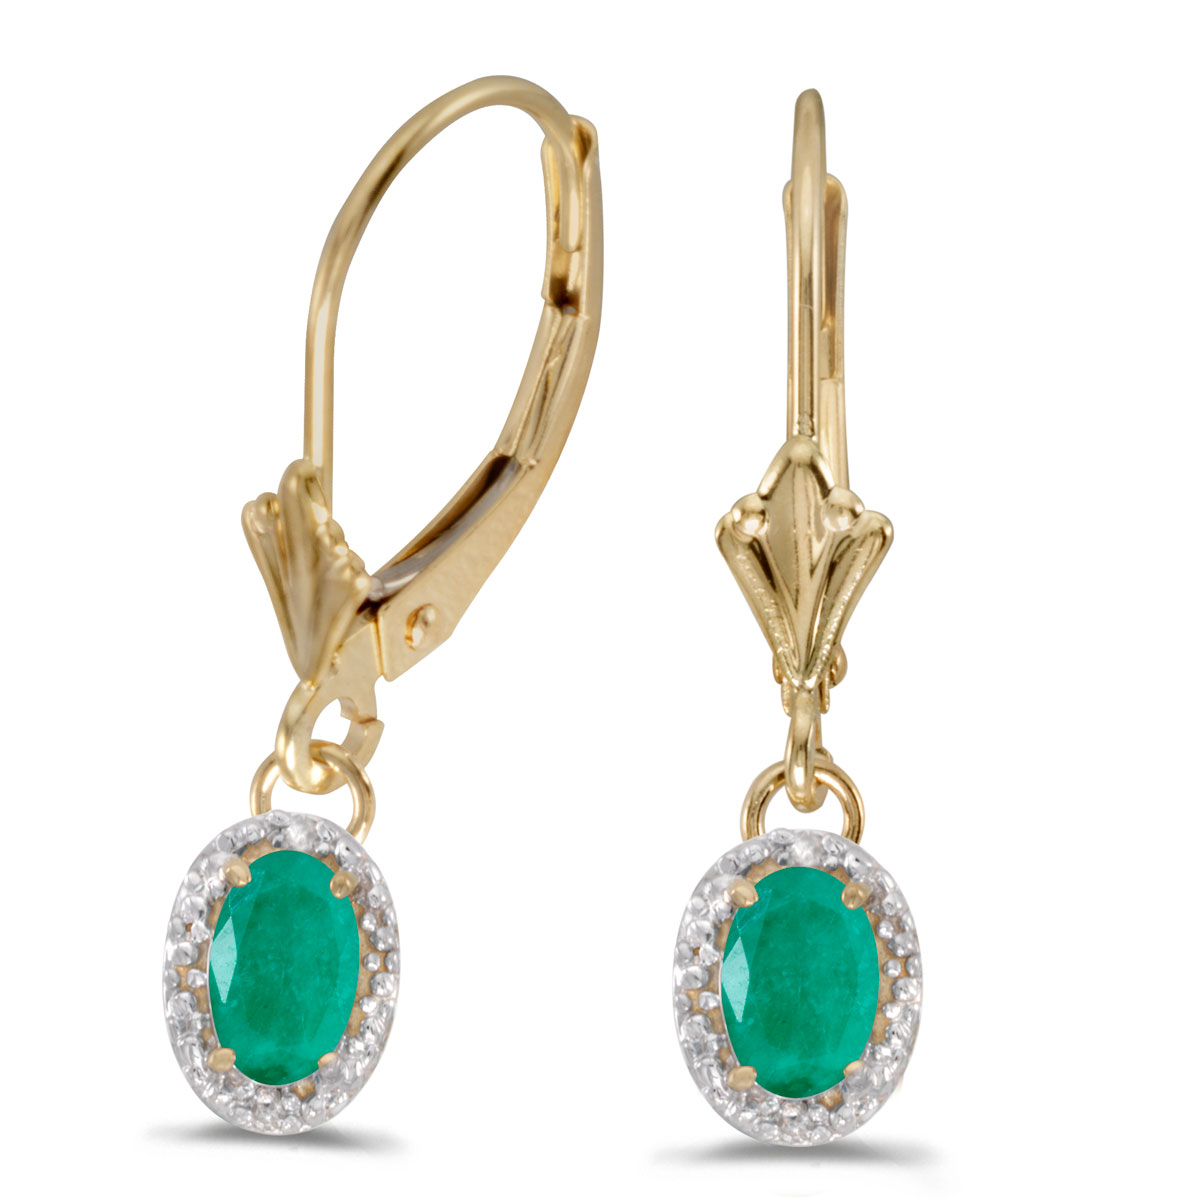 JCX2113: Beautiful 10k yellow gold leverback earrings with regal 6x4 mm emeralds complemented with bright diamonds.